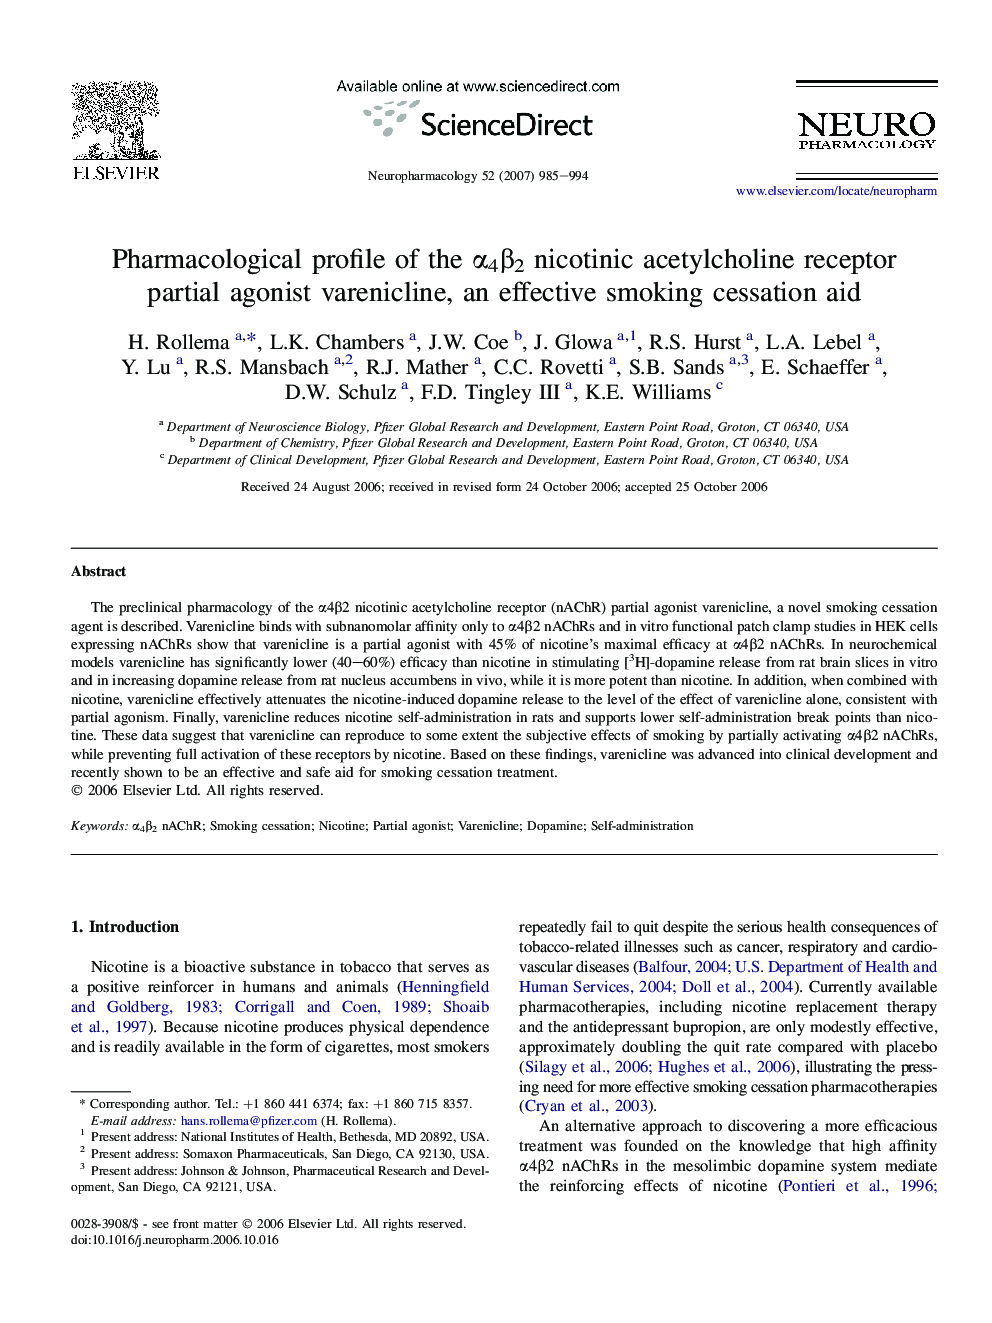 Pharmacological profile of the α4β2 nicotinic acetylcholine receptor partial agonist varenicline, an effective smoking cessation aid